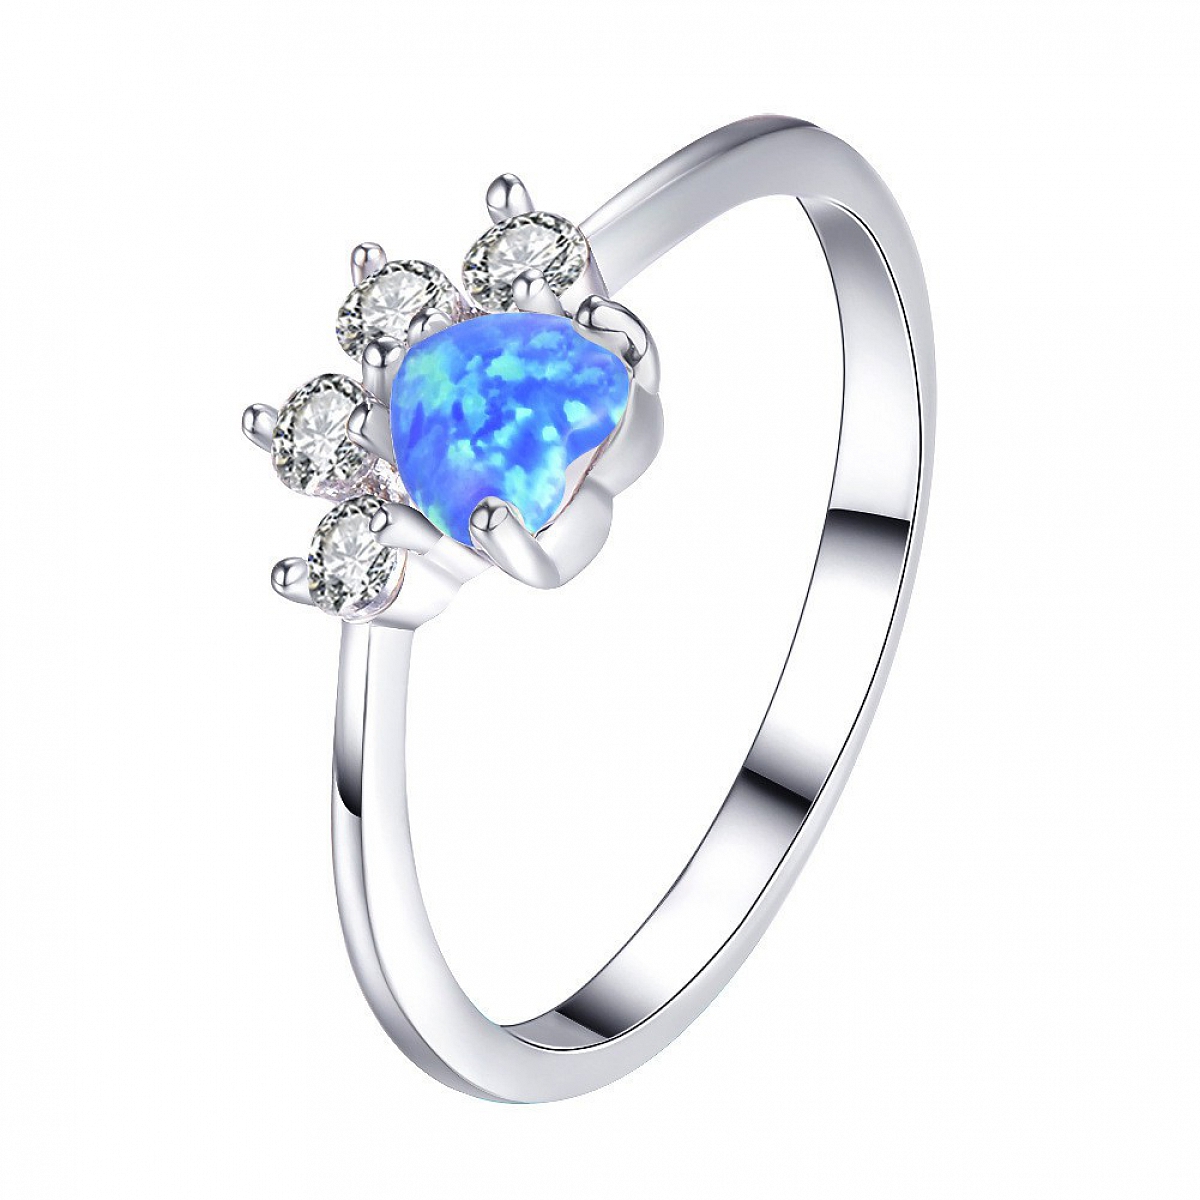 Opal & Crystal Paw Ring PWB315 - Ring - PromiseIn